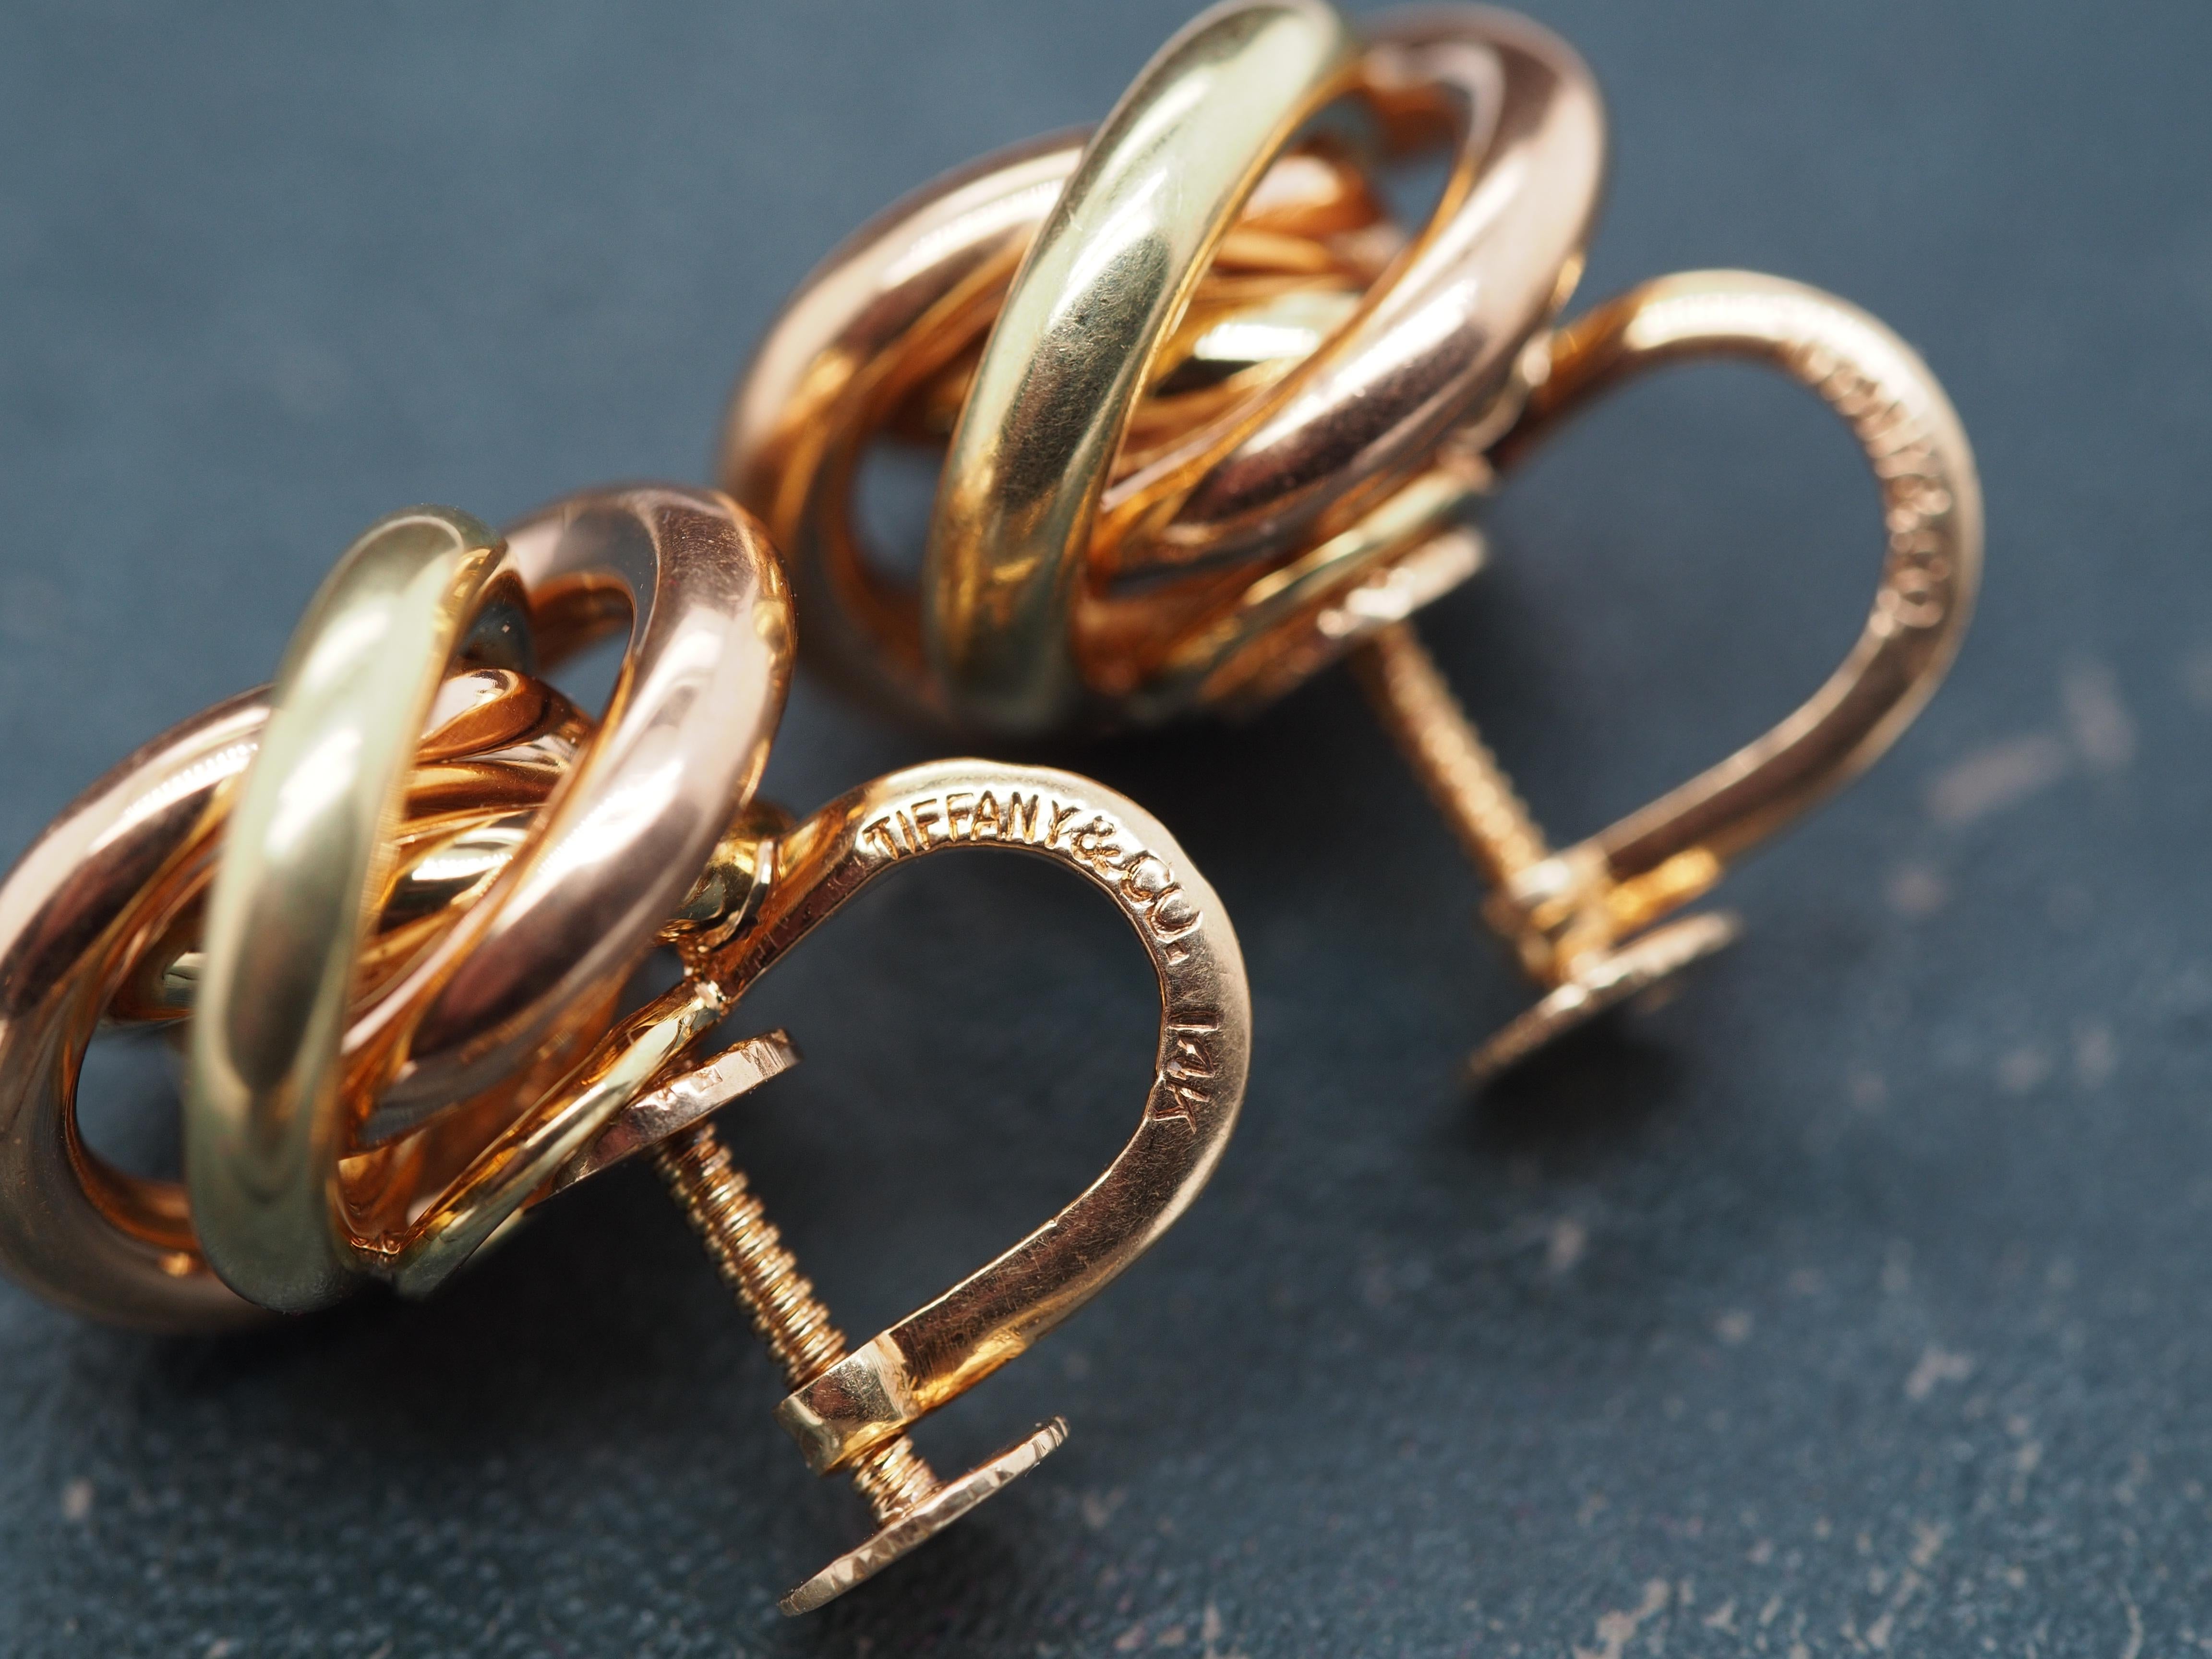 Circa 1950s Tiffany & Co 14K Yellow and Rose Gold Knot Earrings For Sale 2